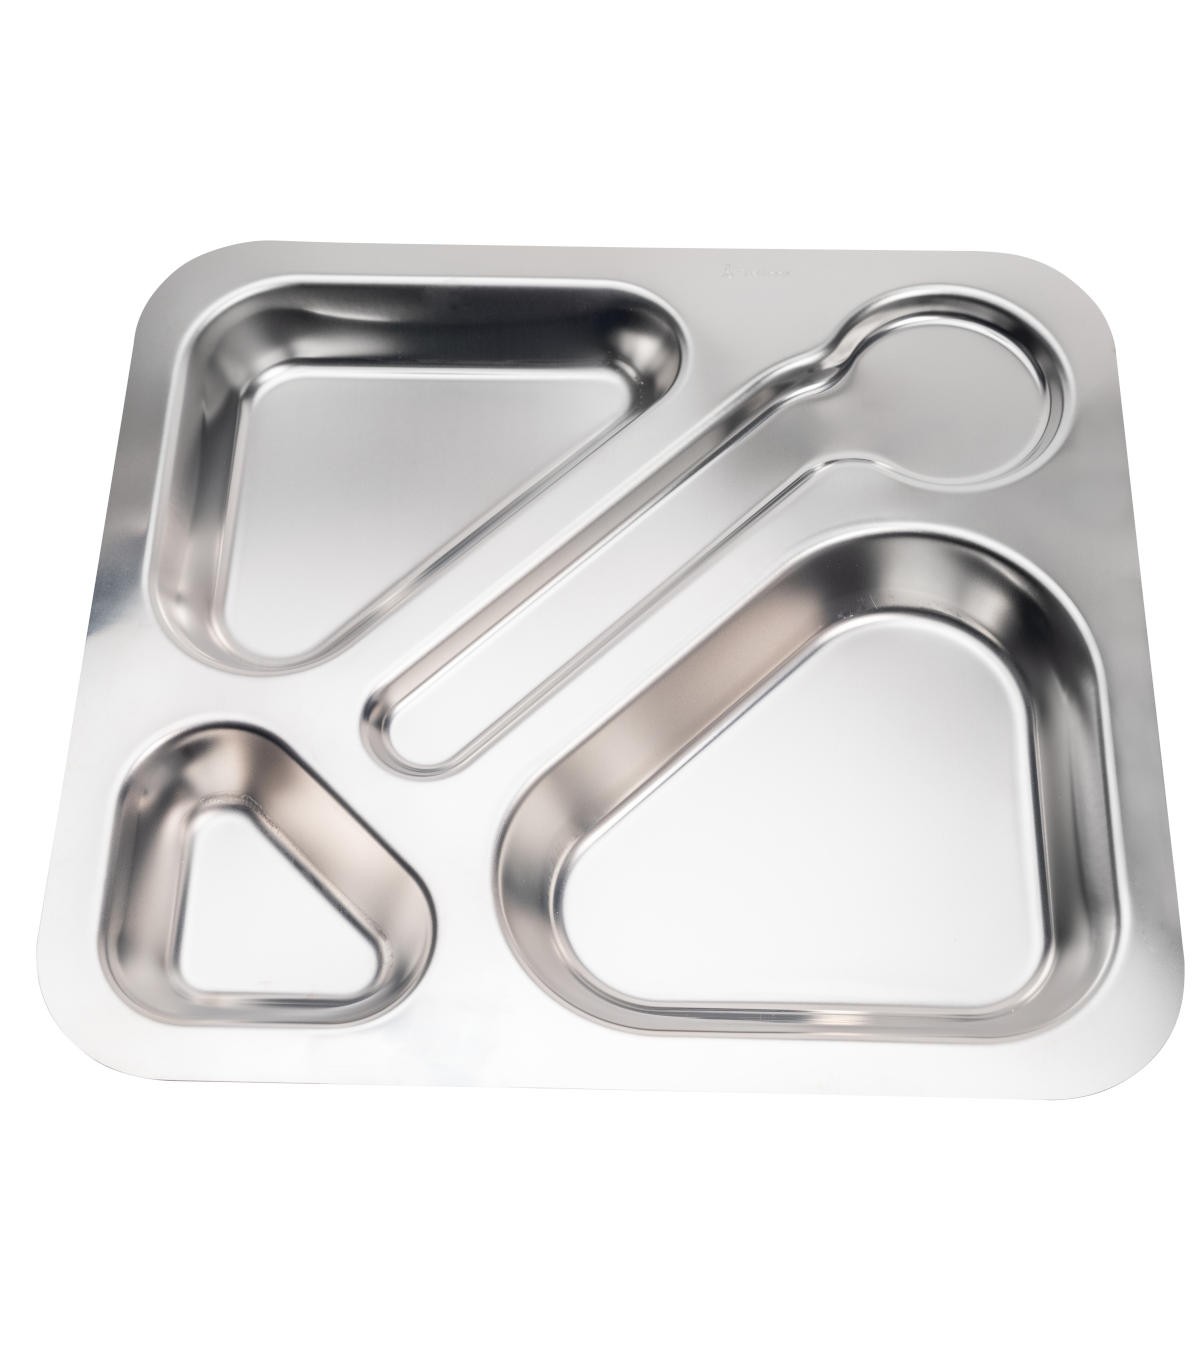 1-4529-14 Deep Type Stainless Steel Tray Set Size 404 x 285 x 95mm 10 【AXEL  GLOBAL】ASONE